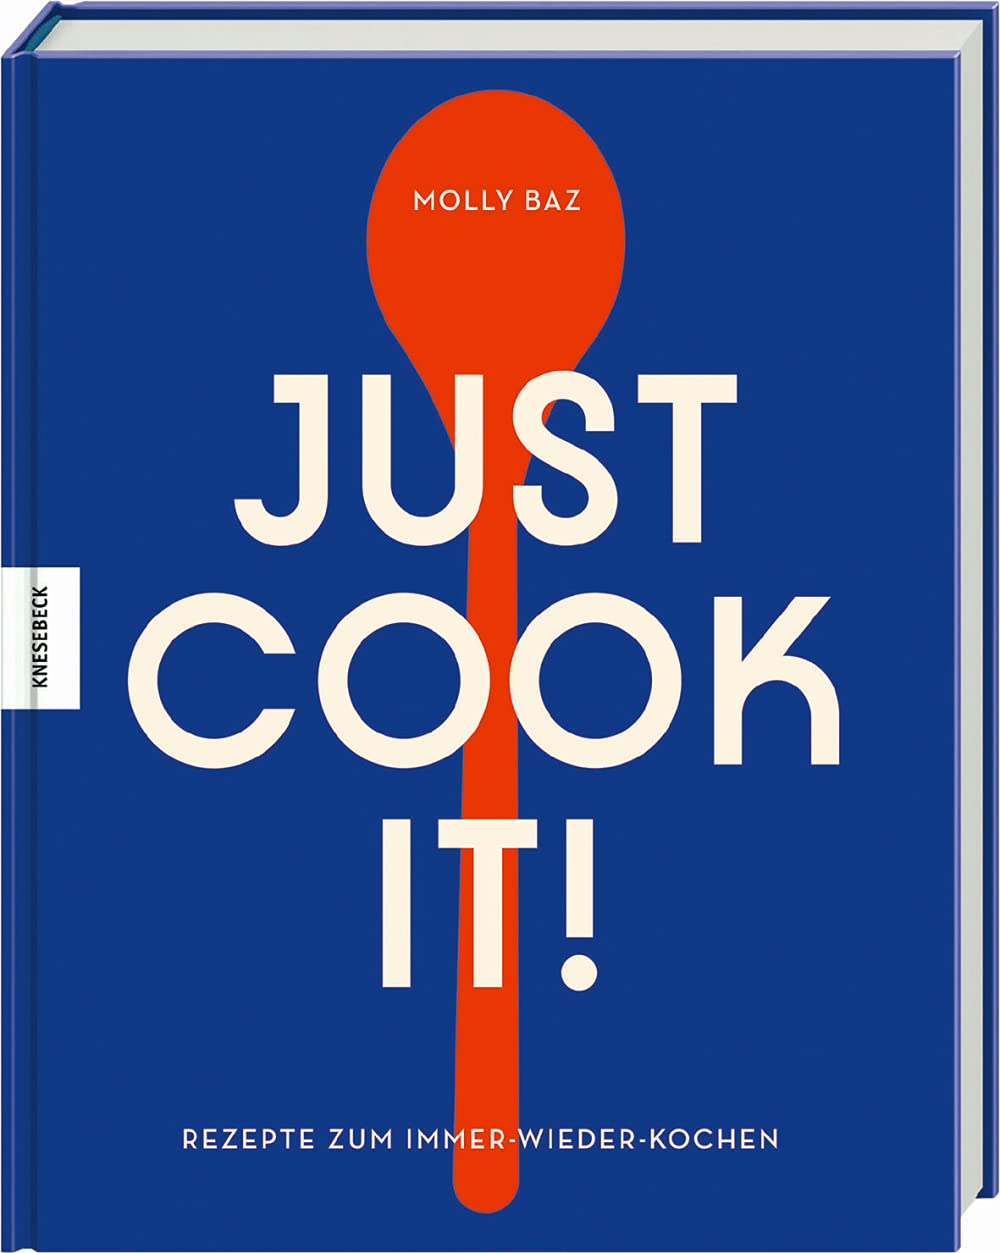 Molly Baz: Just cook it!